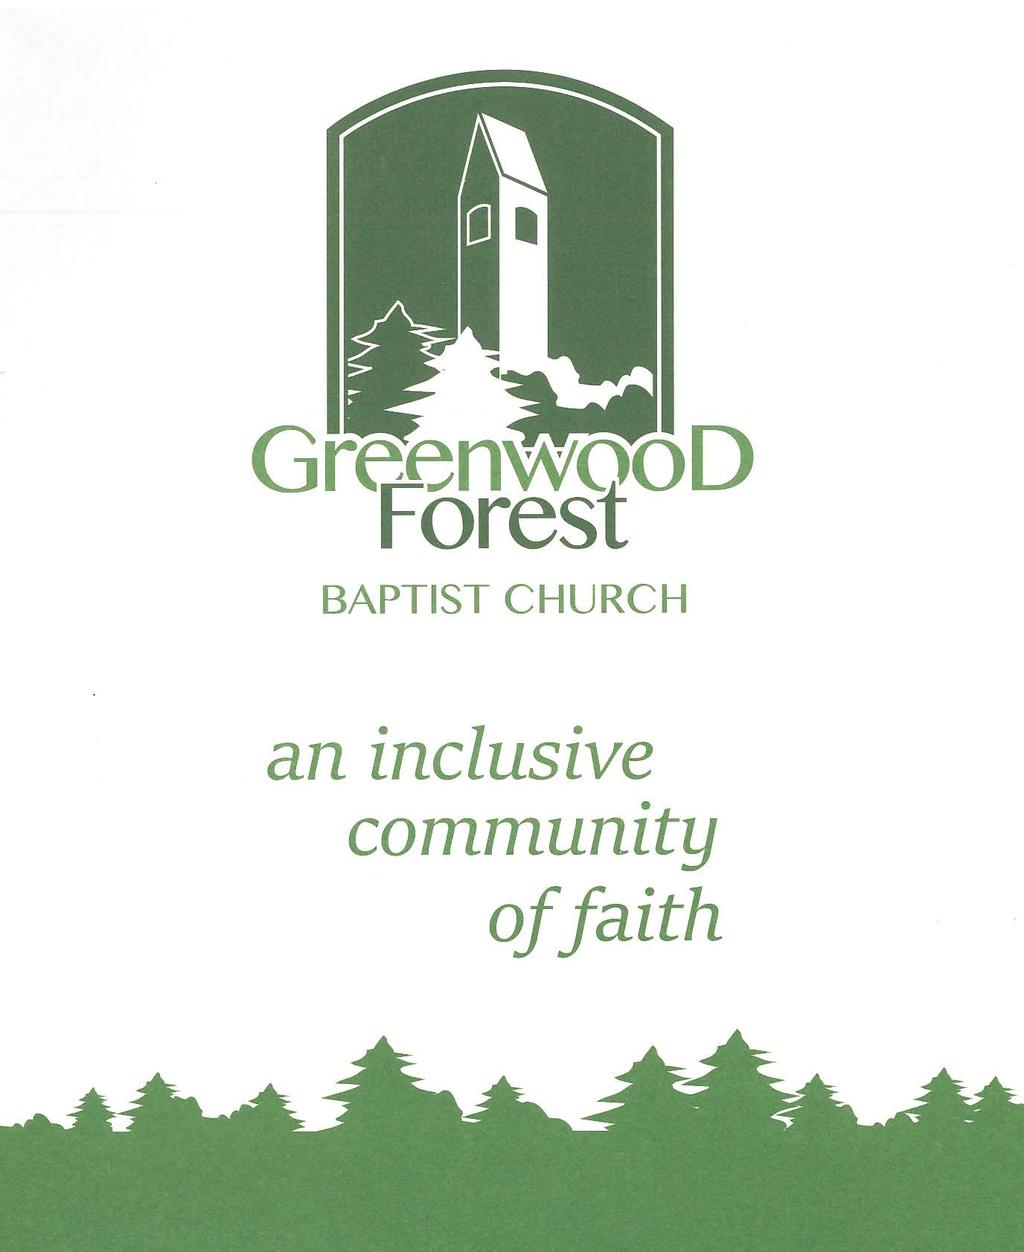 Greenwood Forest Baptist Church The First Sunday of Advent Chiming of the Hour GREENWOOD FOREST BAPTIST CHURCH The Worship of God The First Sunday of Advent December 2, 2018 Processional Hymn 79 (v.